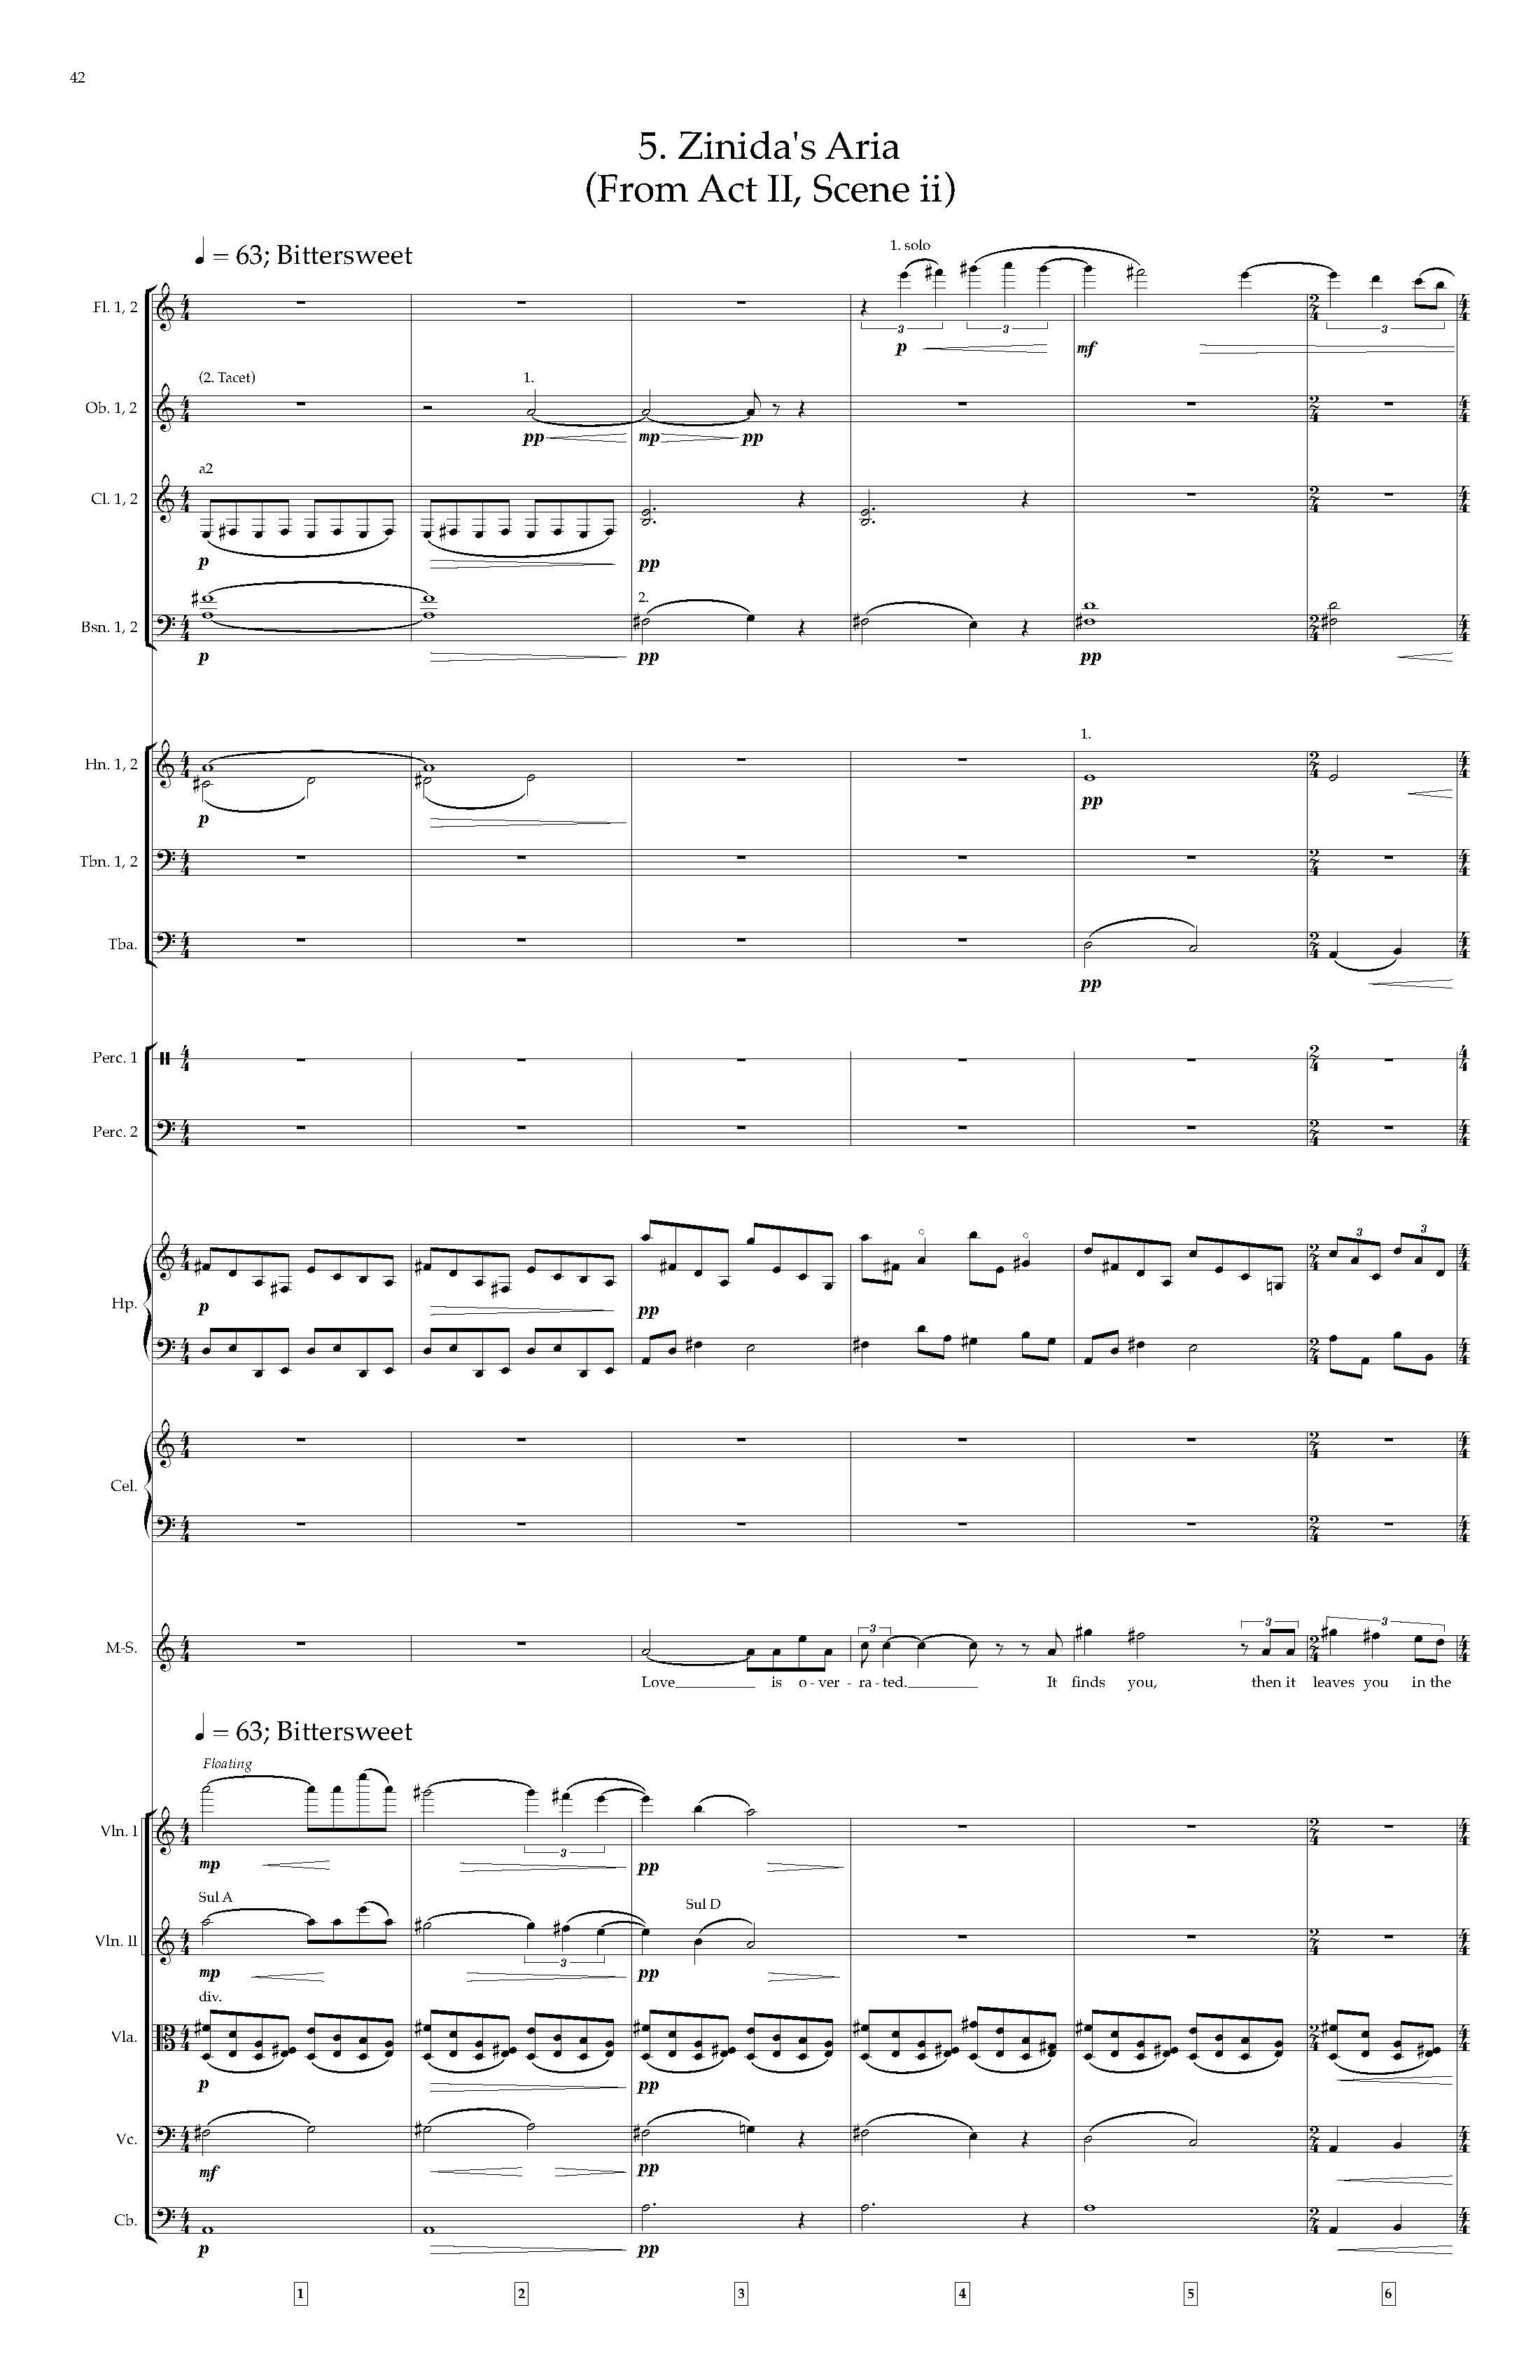 Arias and Interludes from HWGS - Complete Score_Page_48.jpg